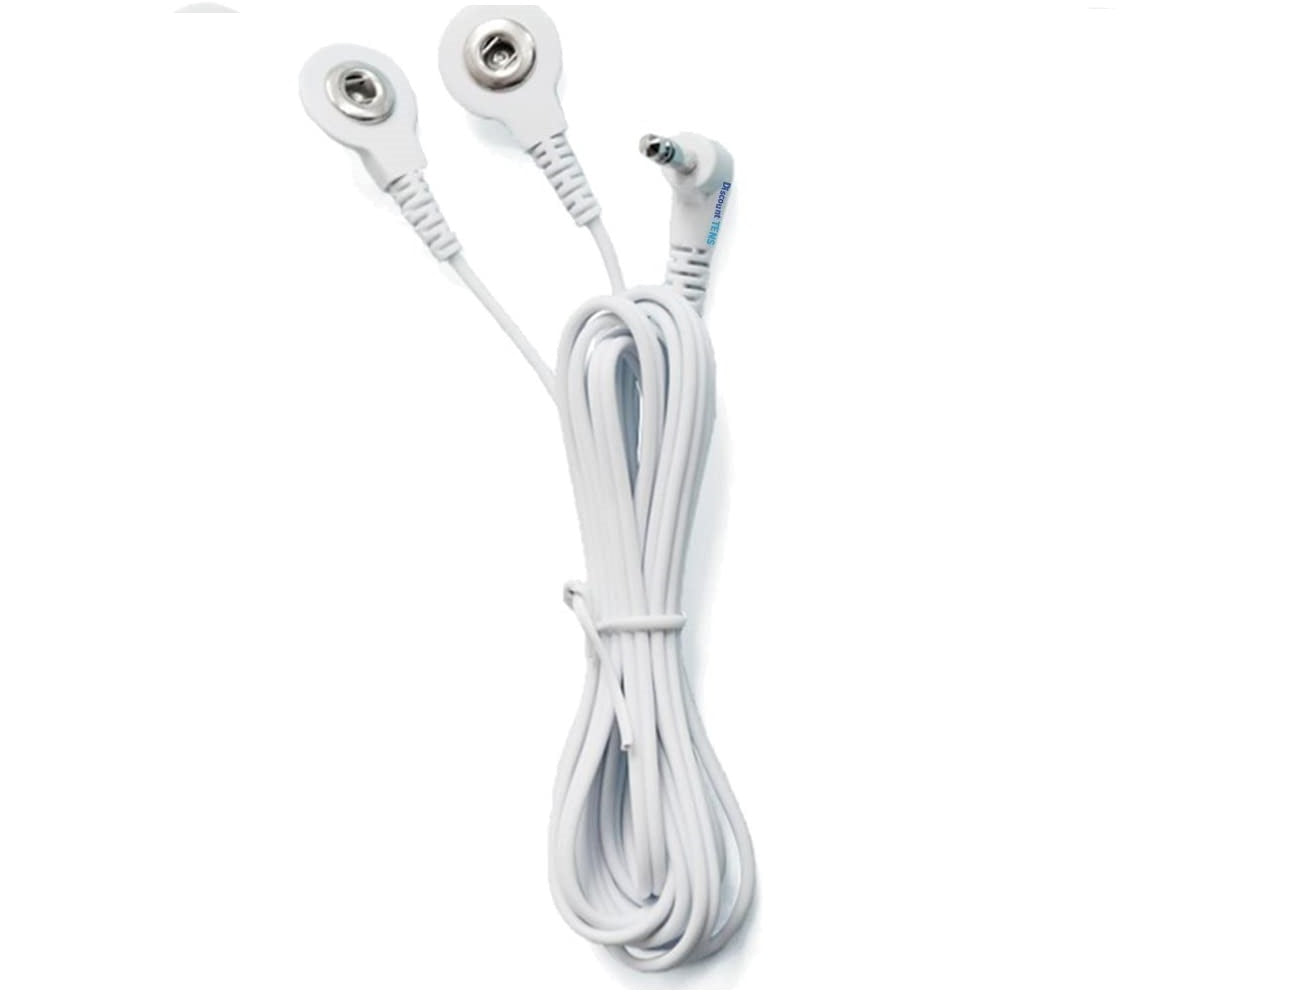 Snap Lead Wires for Cefar 1260